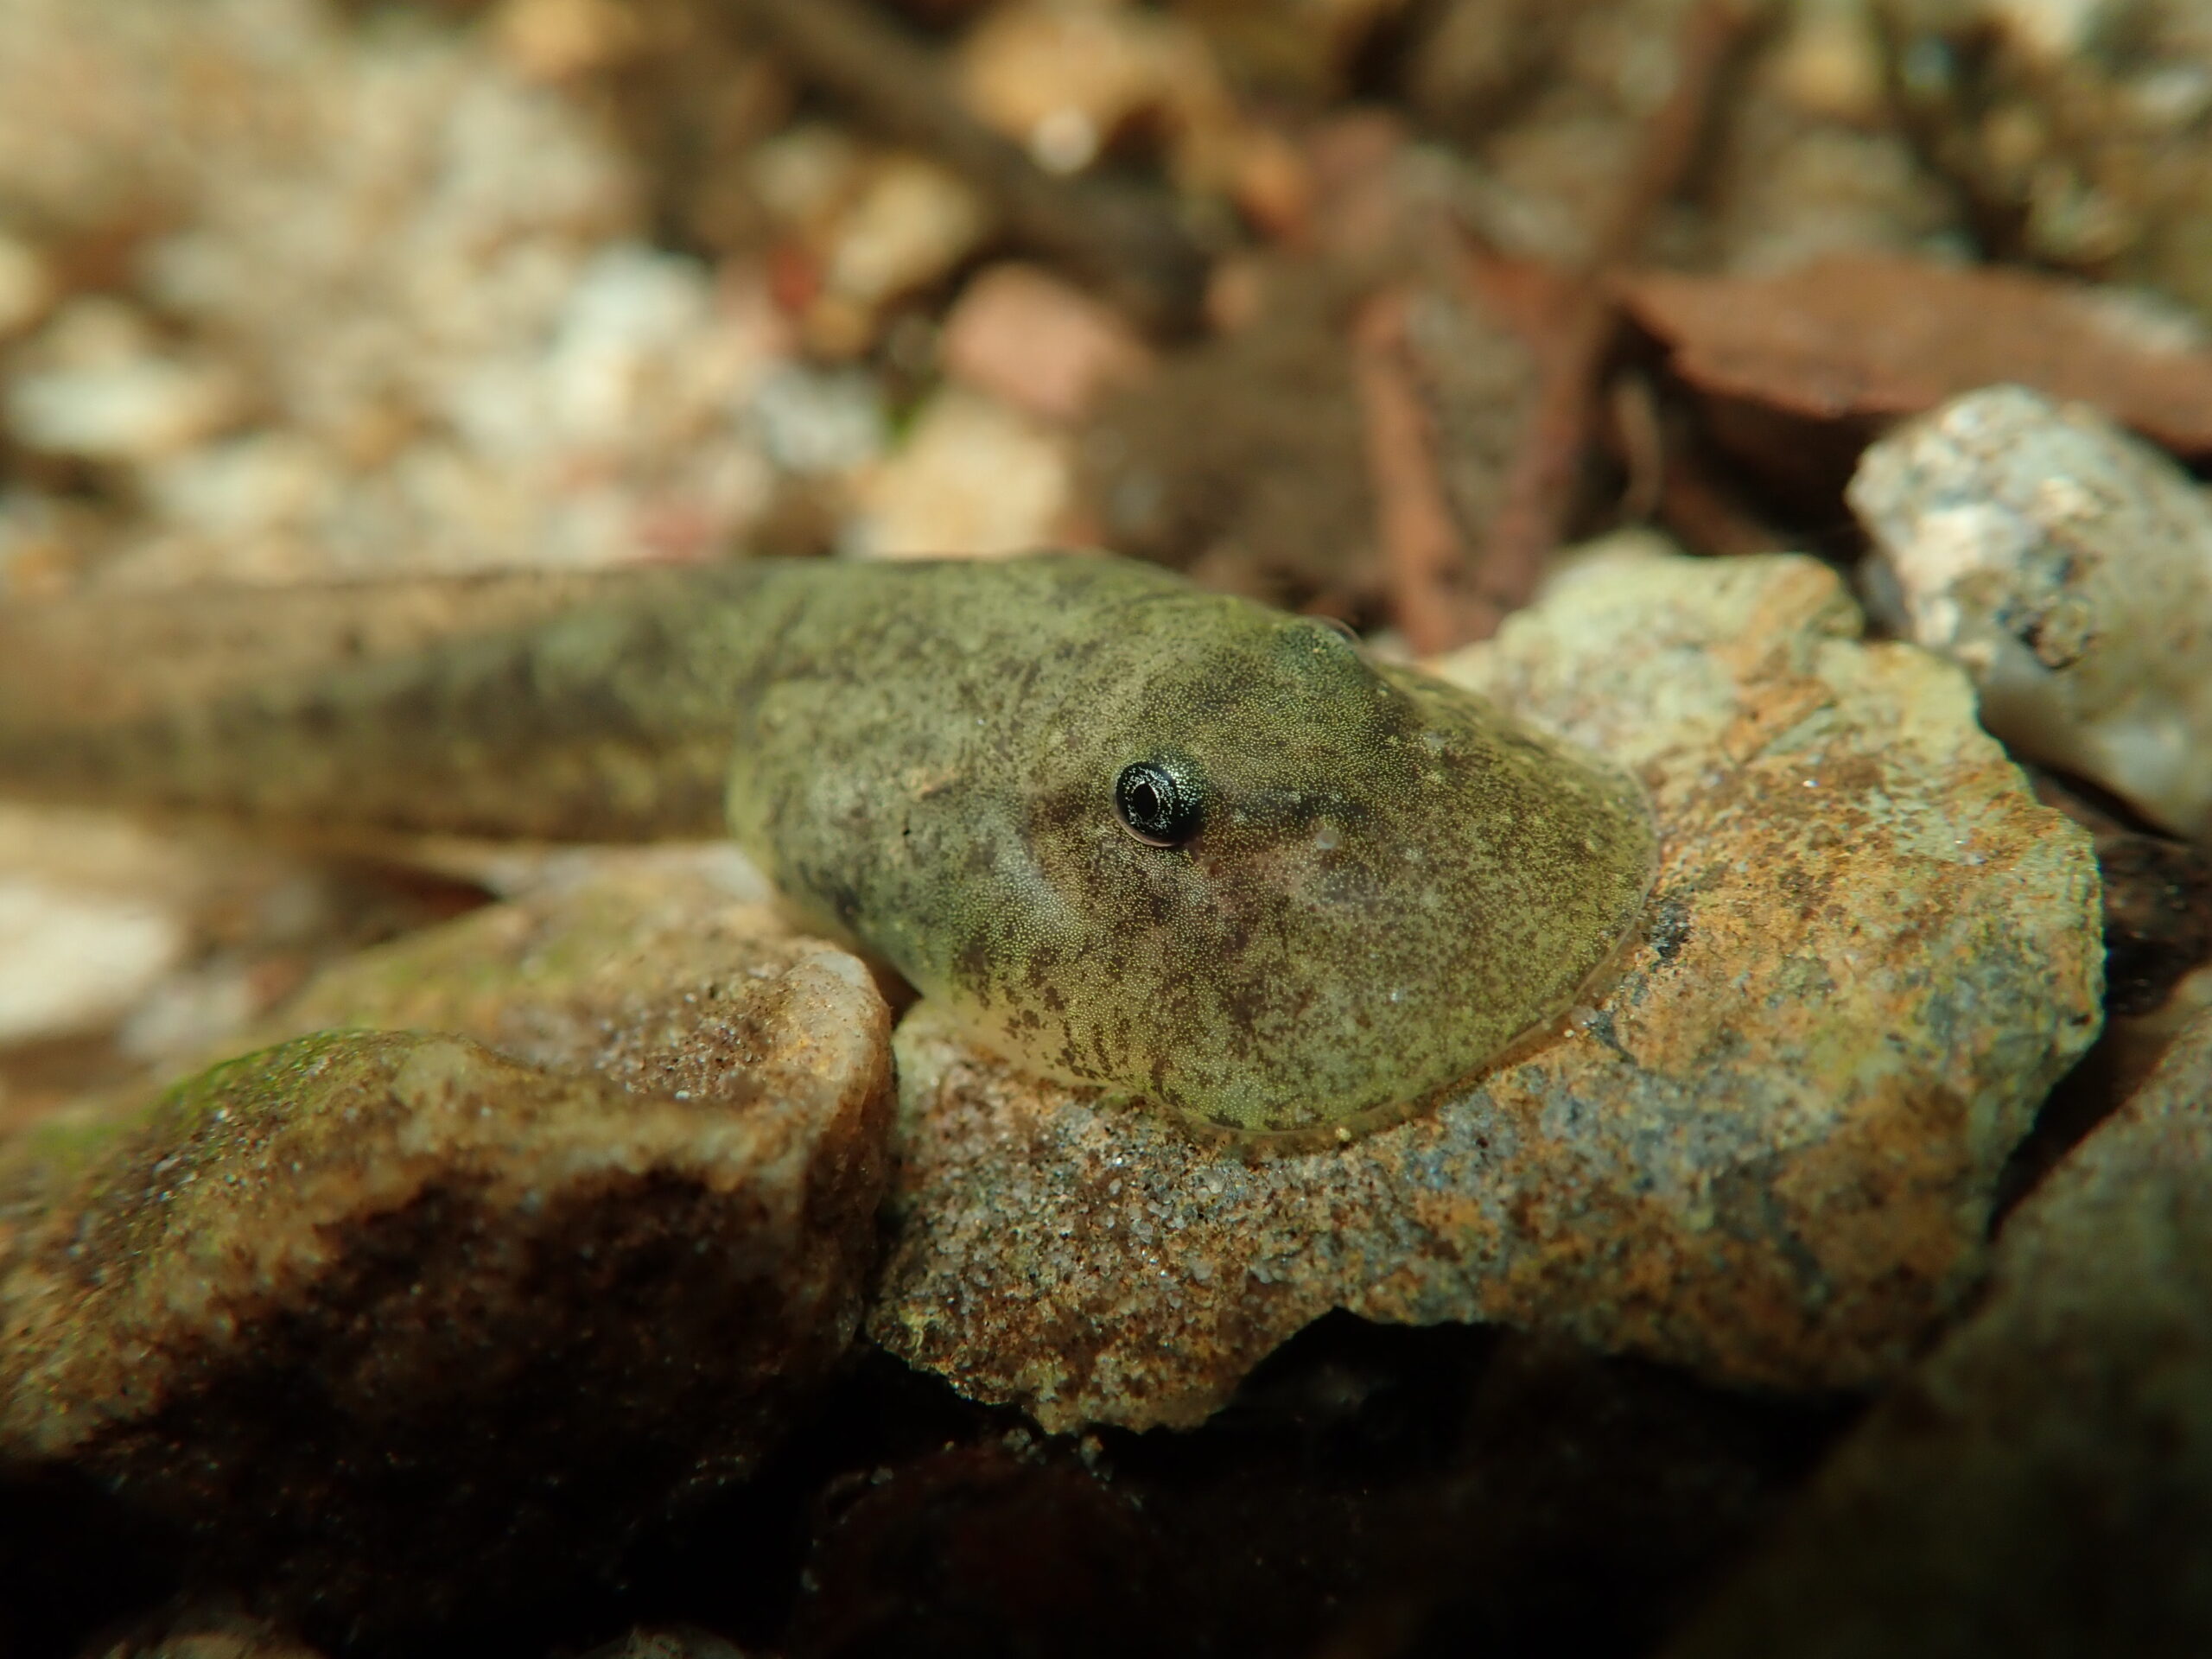 Photograph of juvenile Table Mountain ghost frog tadpole in its freshwater habitat.